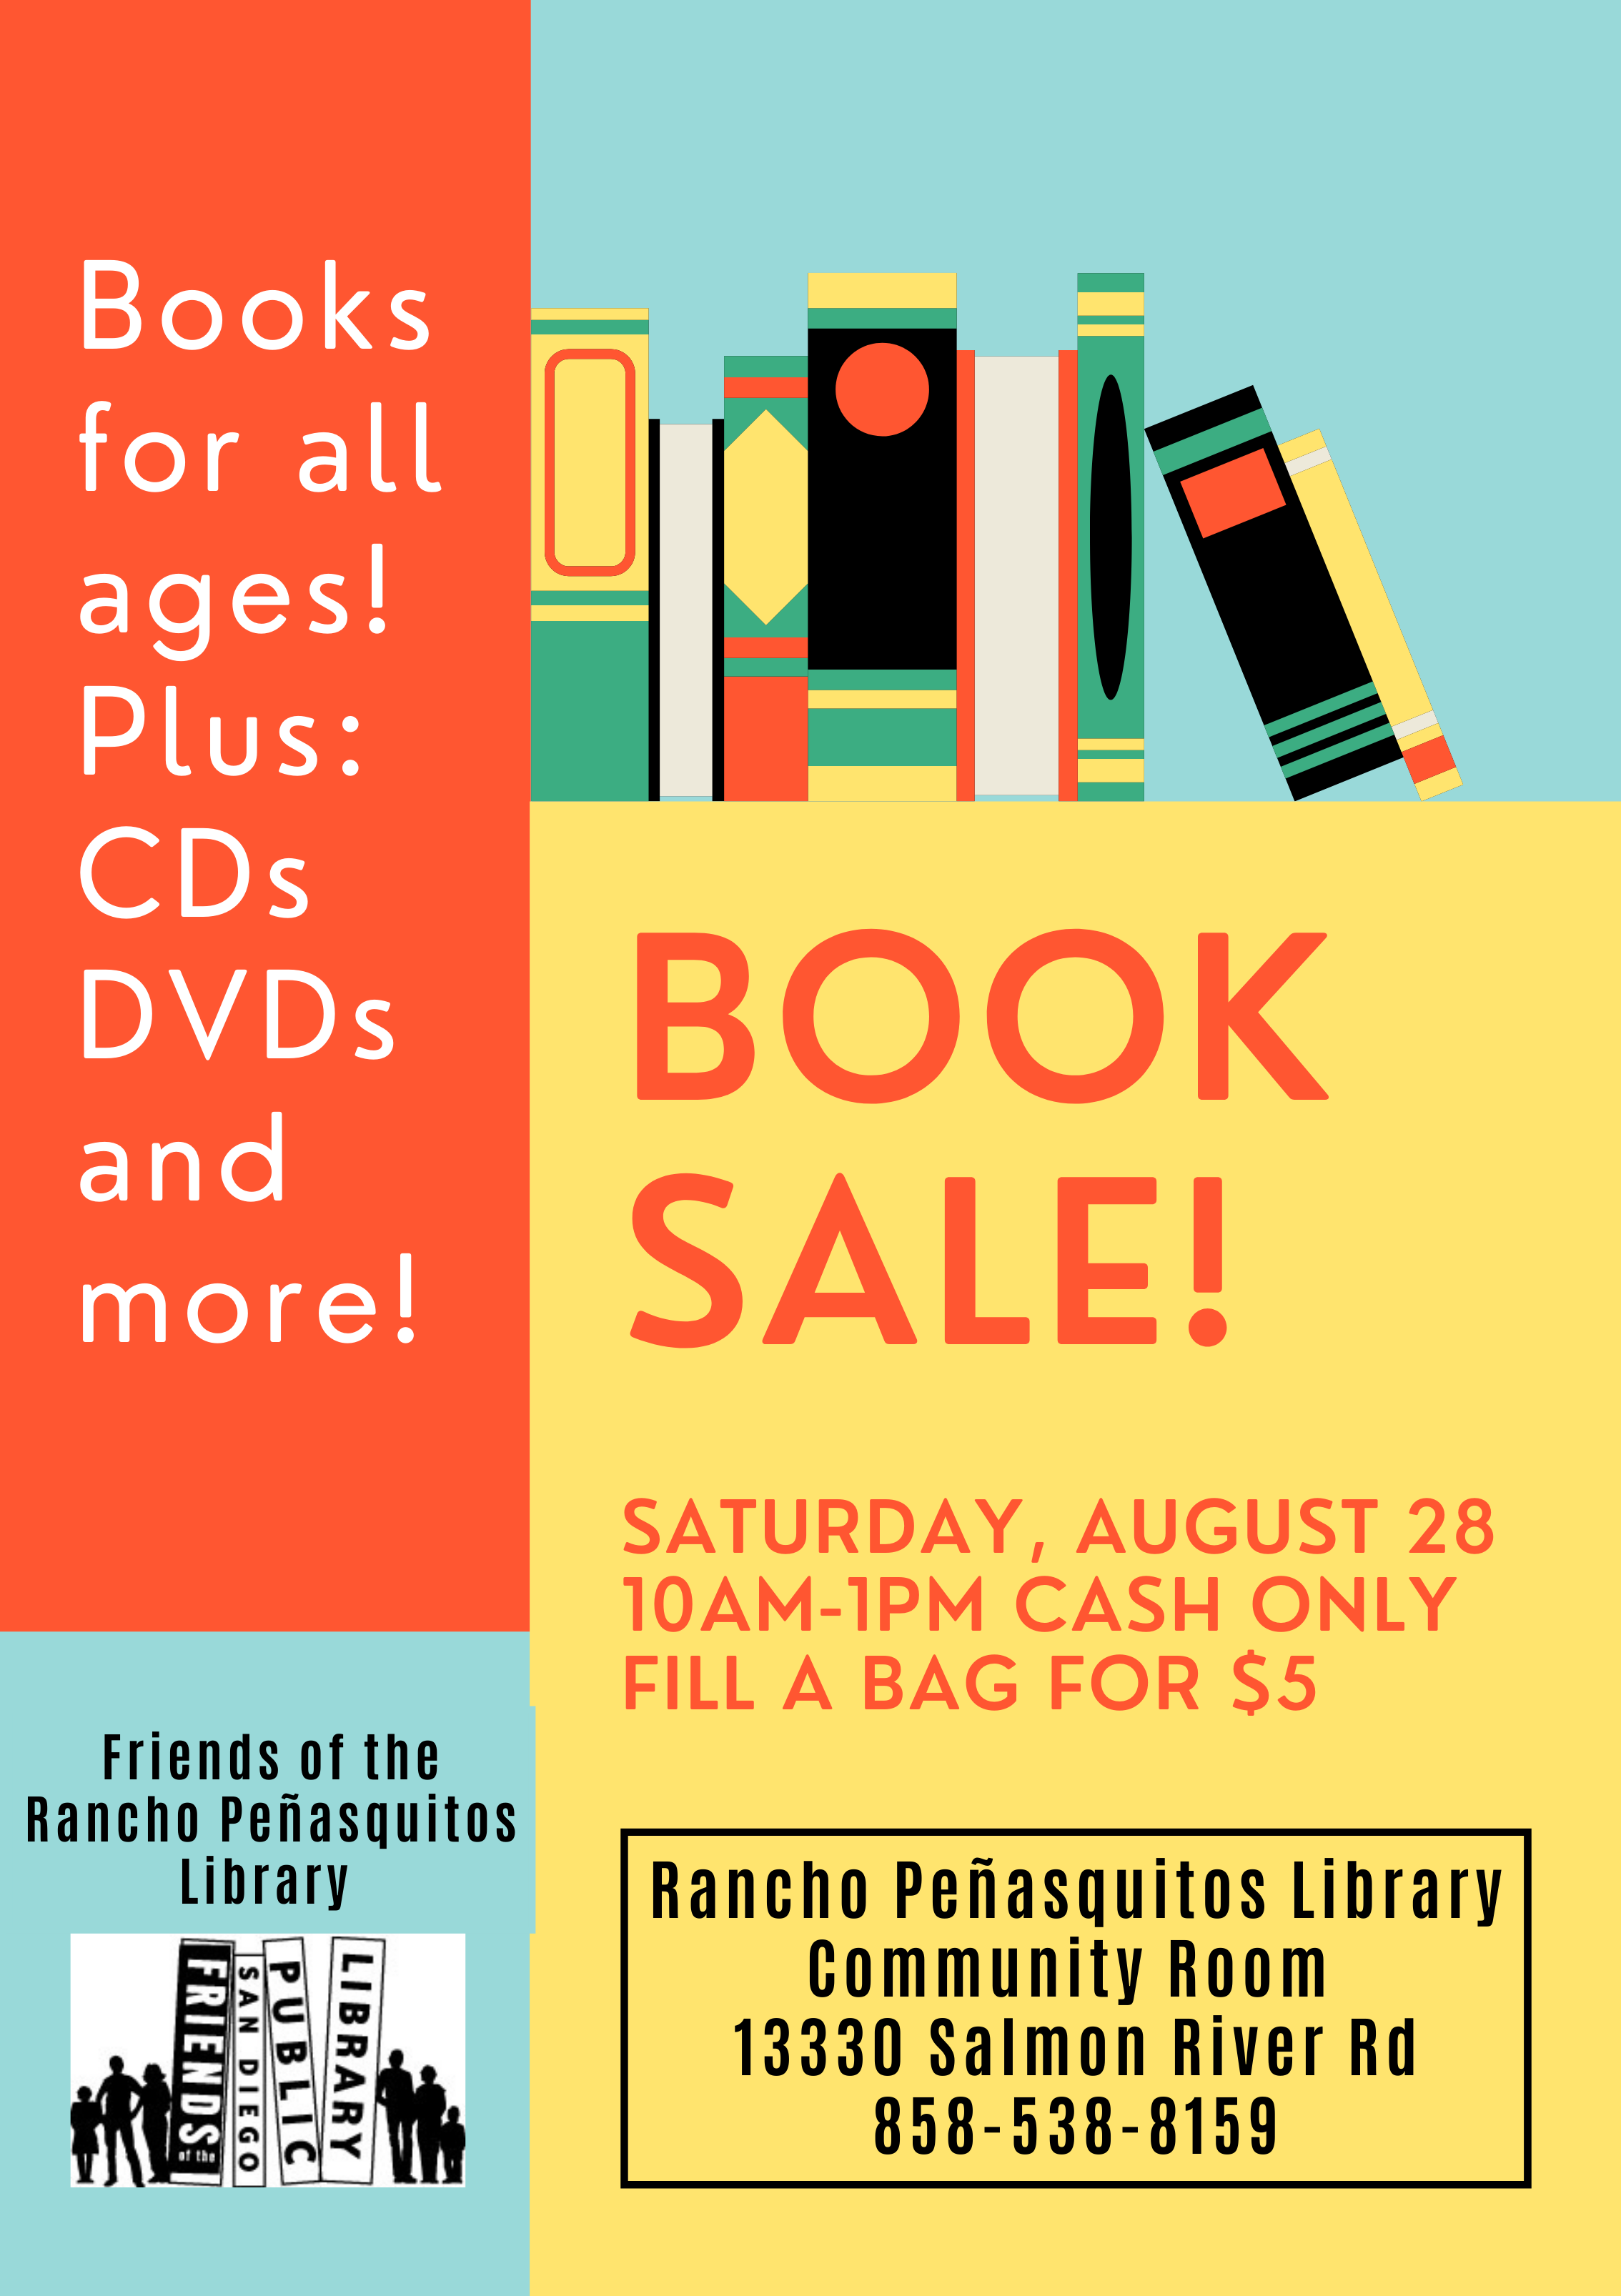 Book Sale Flyer, Fill a bag for $5, August 28th 10 AM to 1 PM